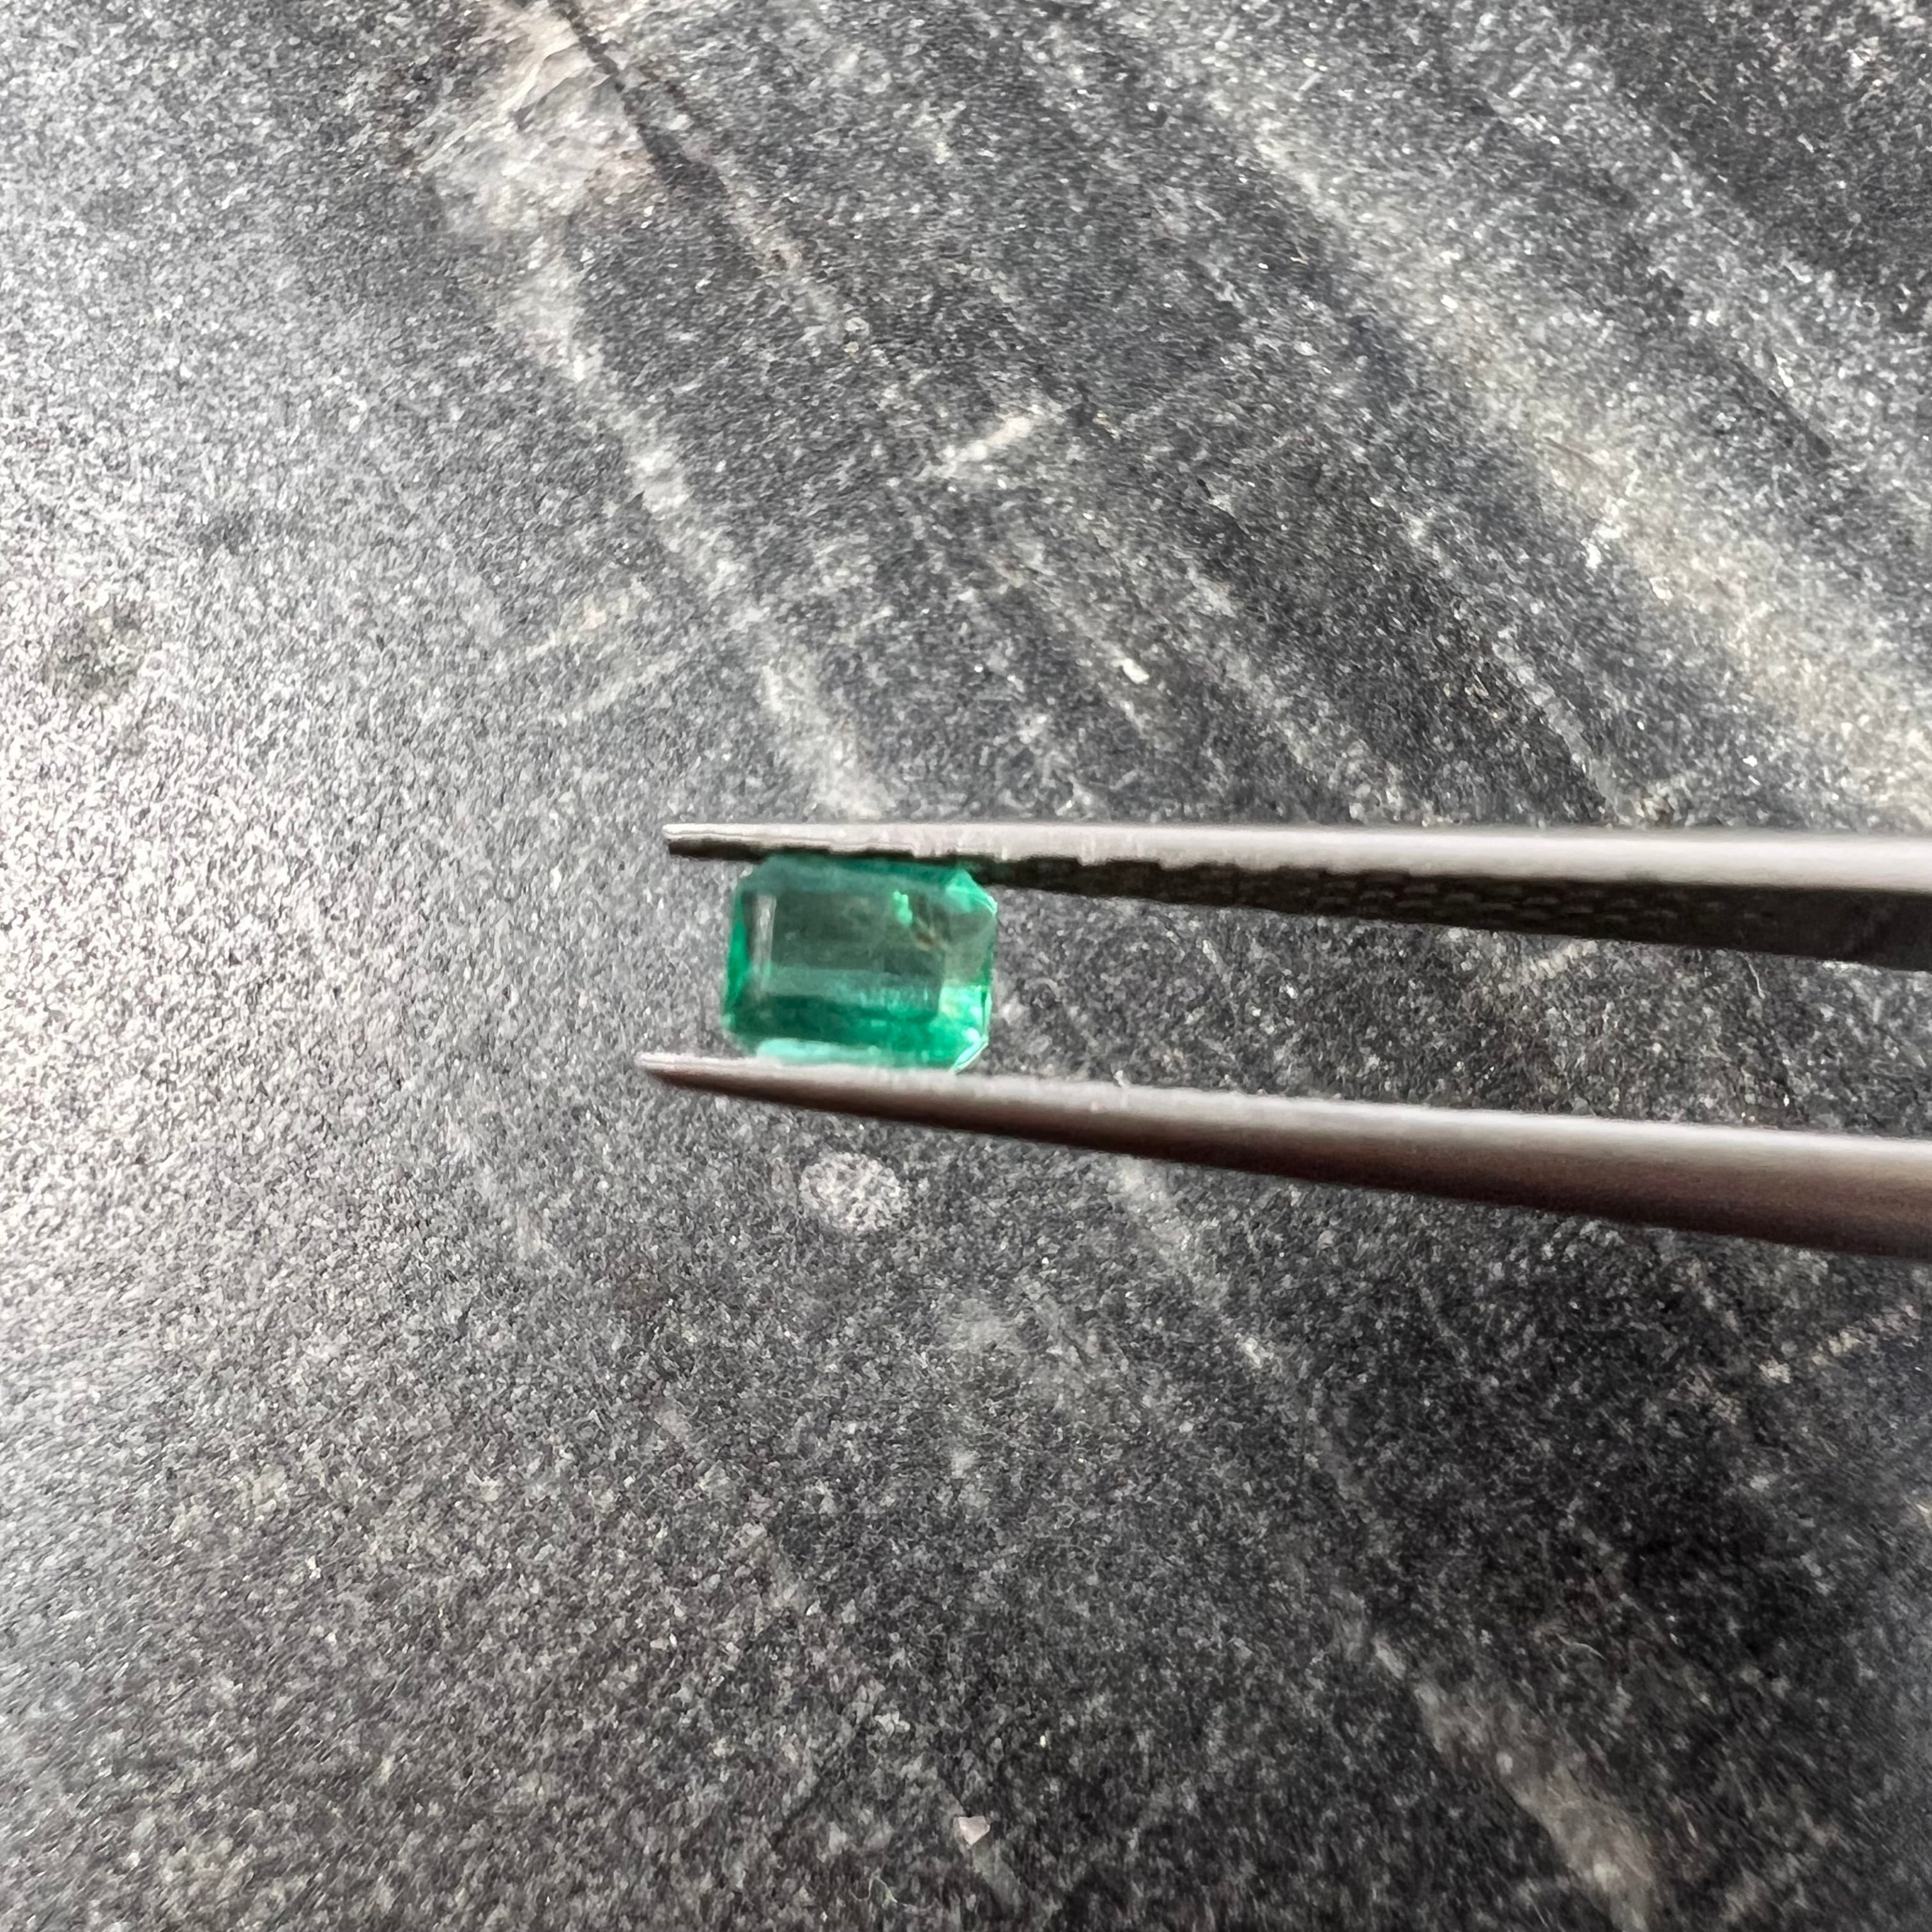 .23CT Loose Natural Colombian Emerald Cut 4.26x3.50x1.88mm Earth mined Gemstone